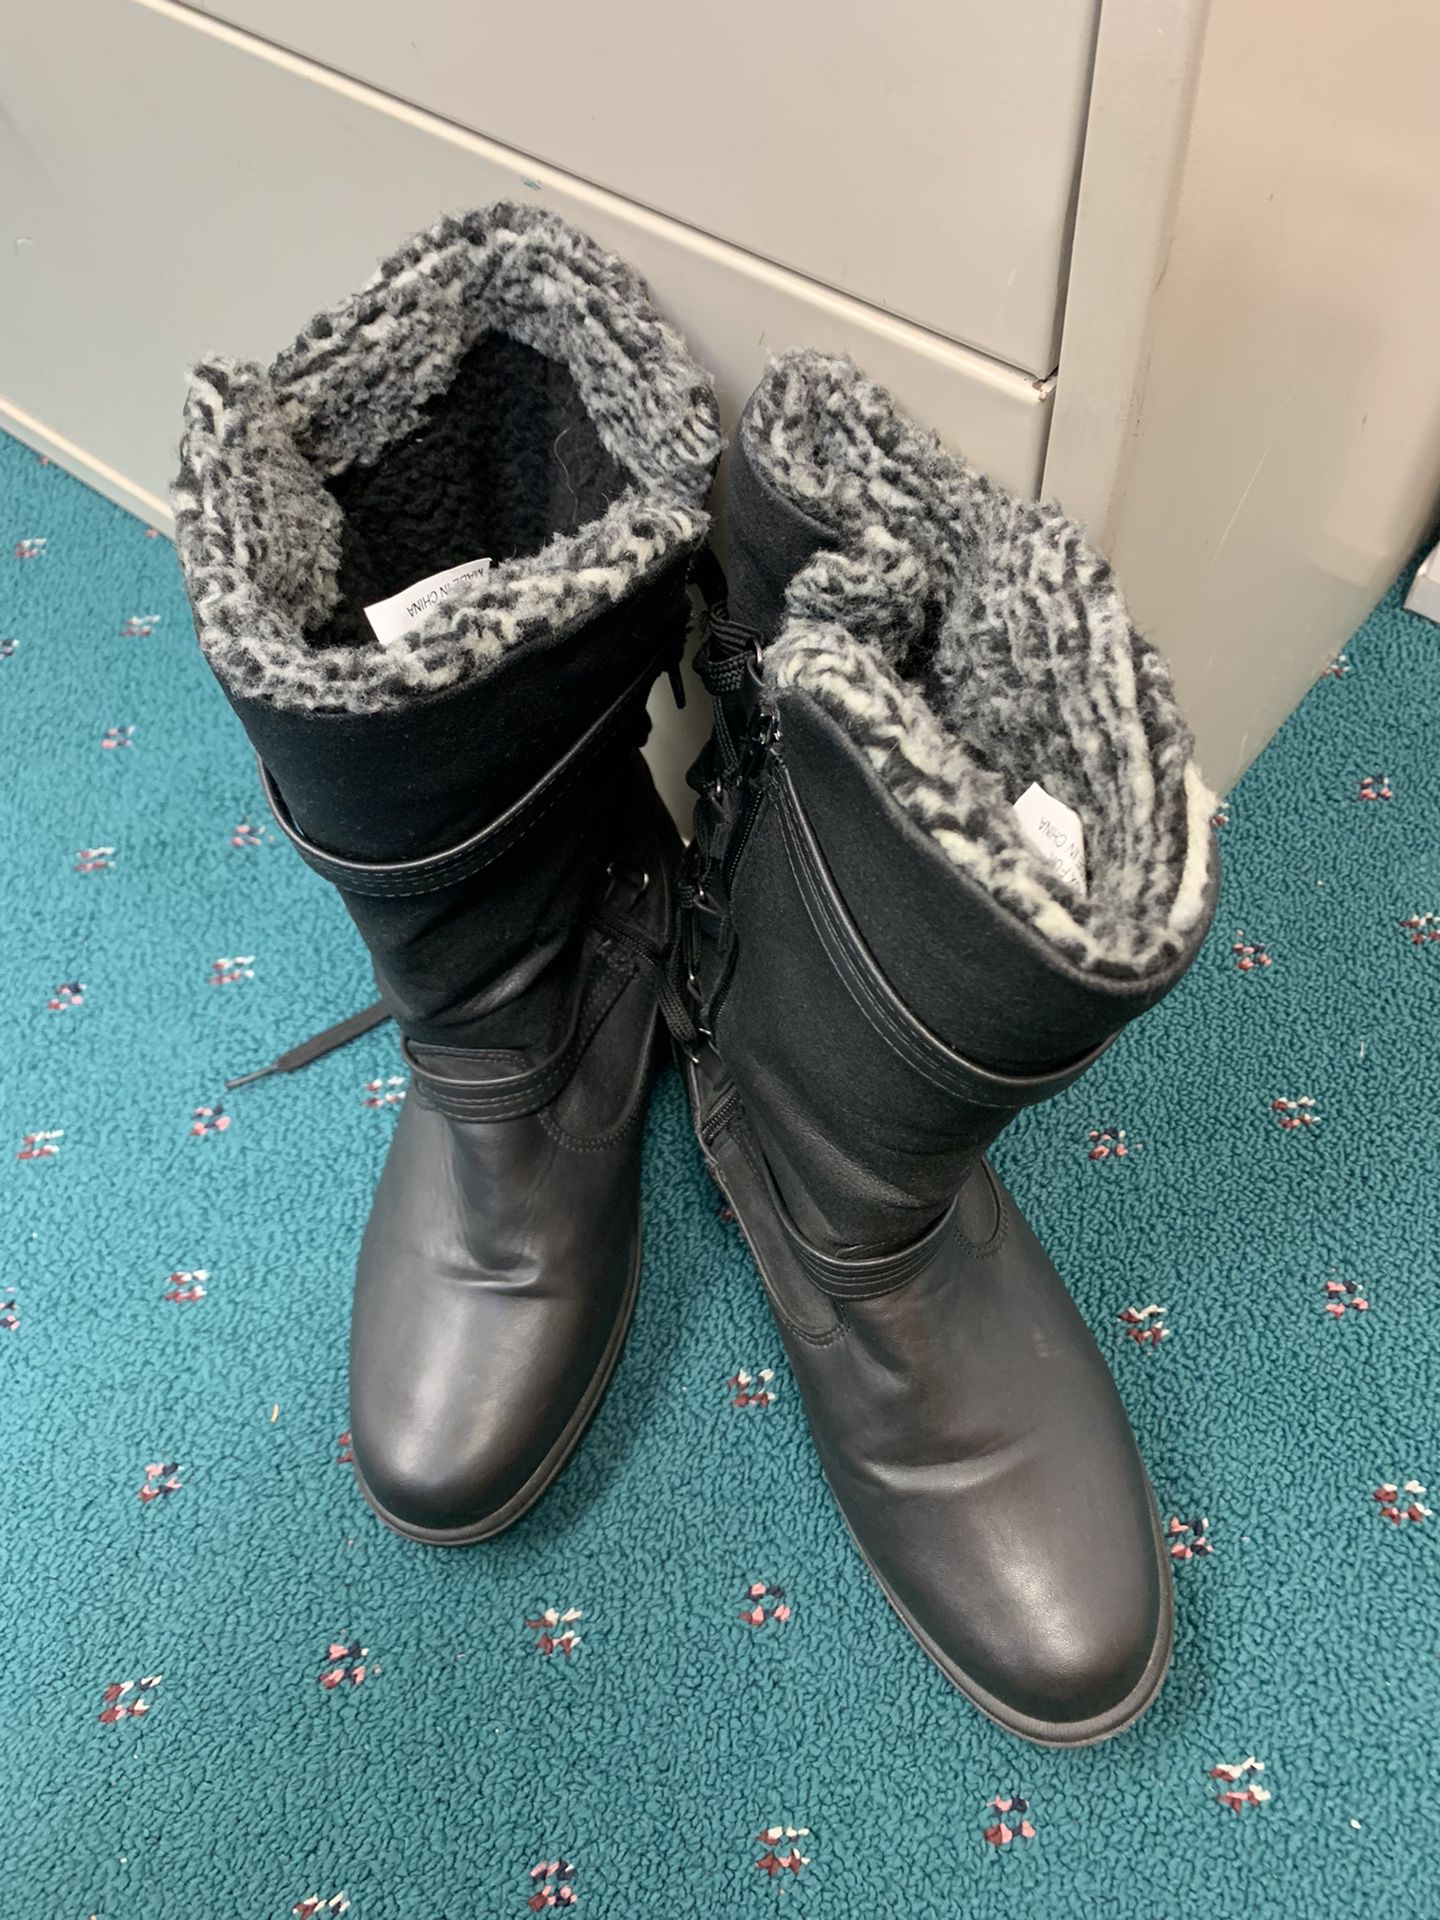 Snow Boots Size 10 